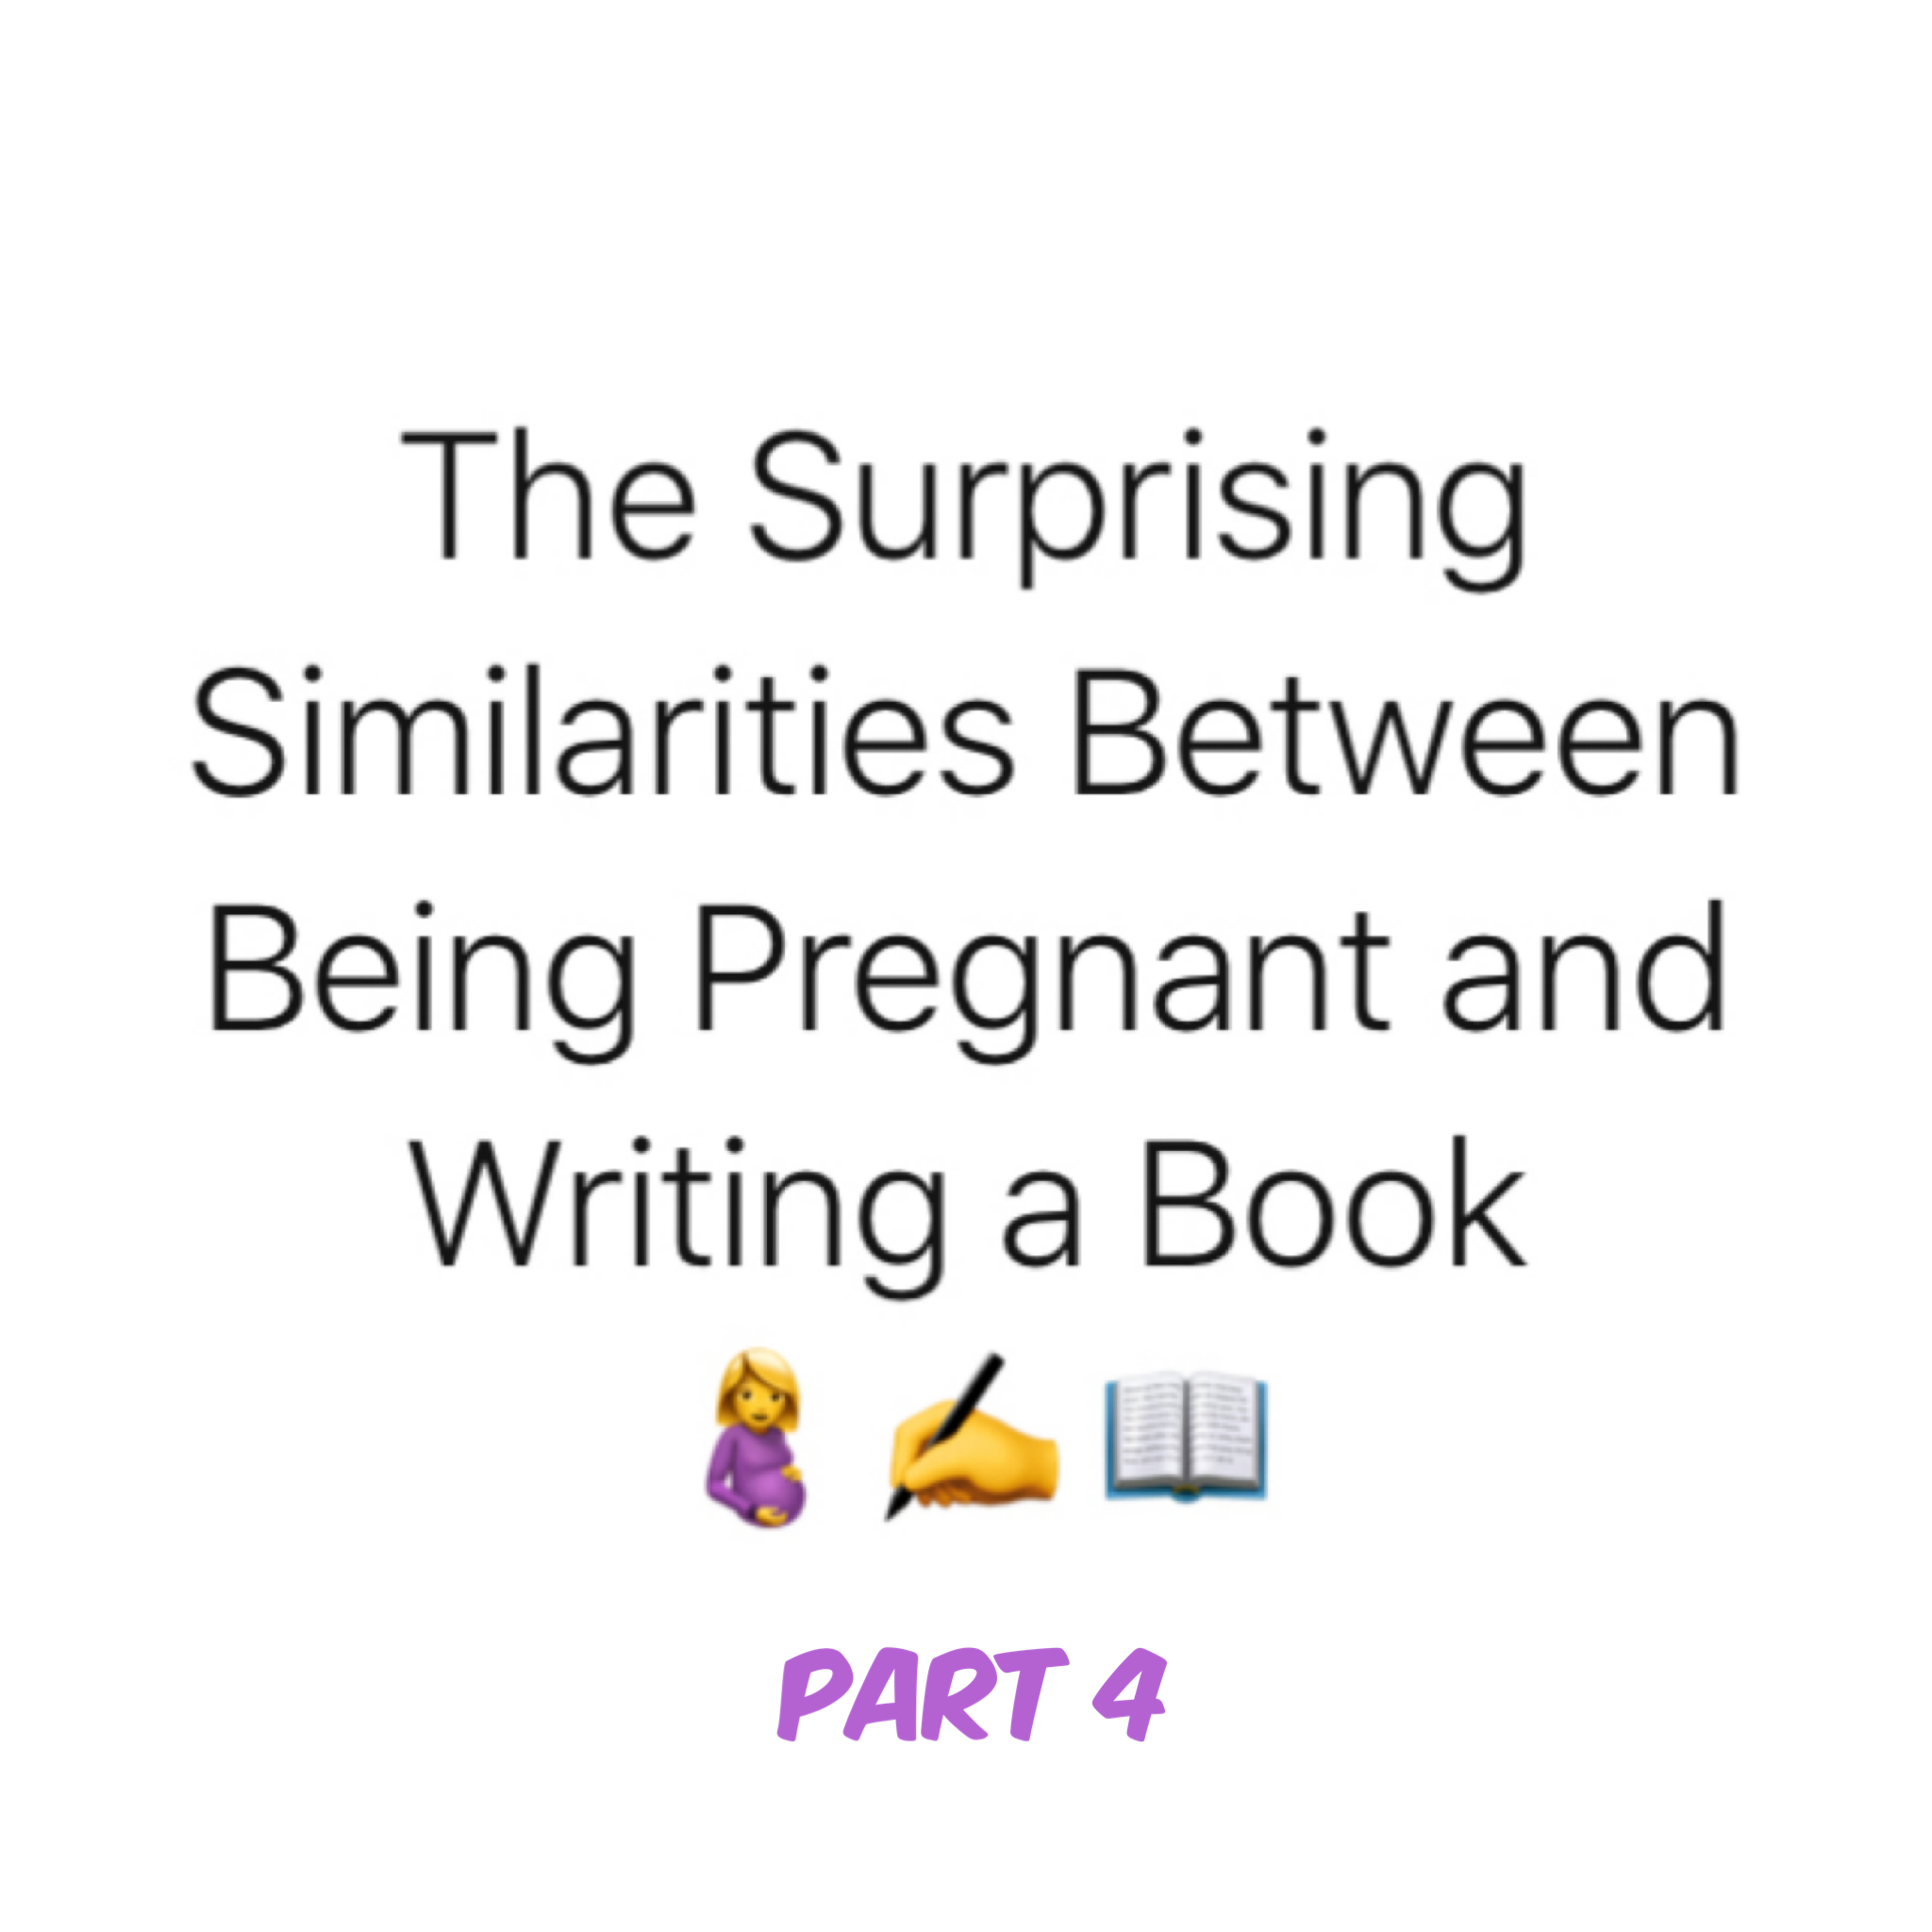 The Surprising Similarities Between Being Pregnant and Writing a Book – Part IV by Diana Tyler